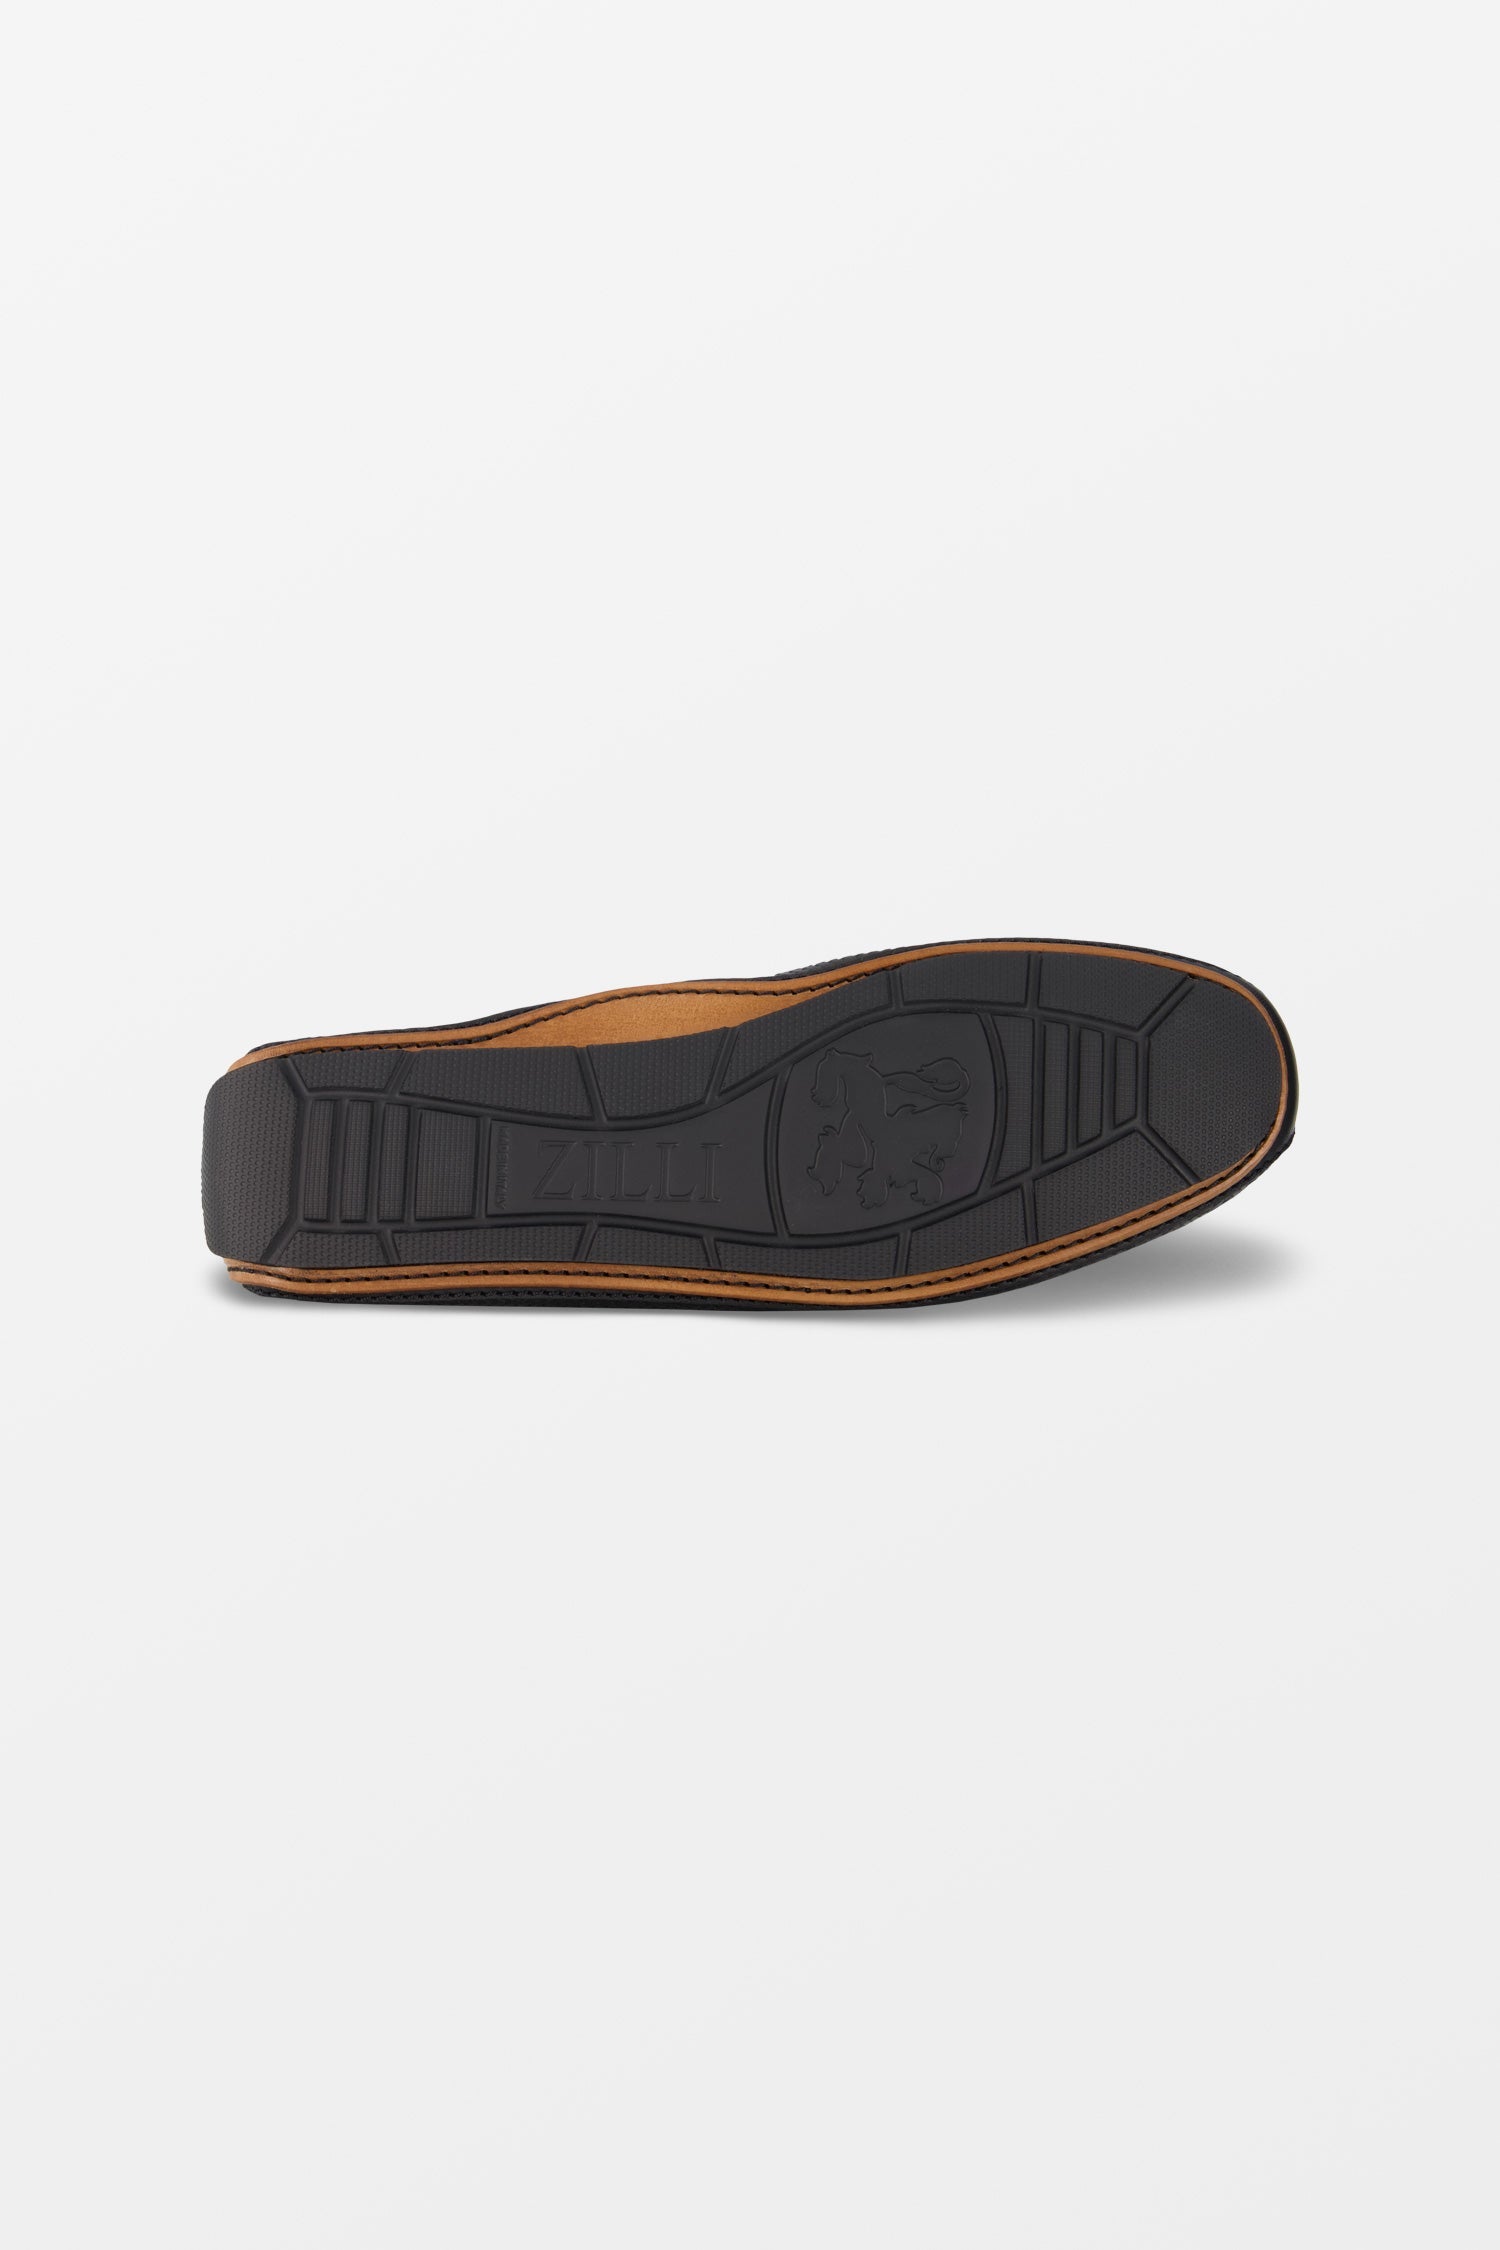 Zilli Black Casual Driving Moccasins